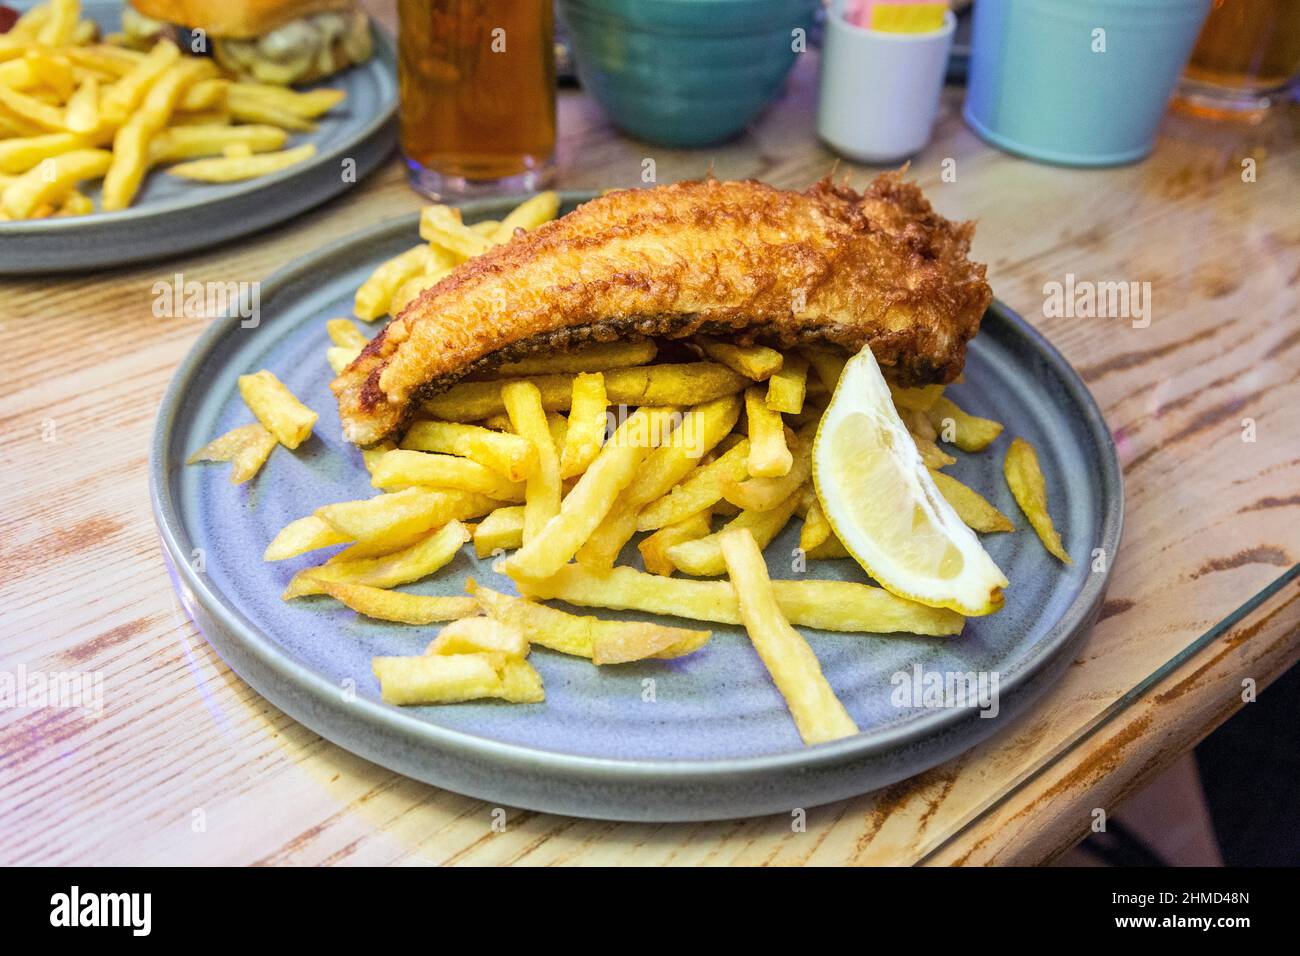 Fish and chips at The Belgian Cafe Stock Photo